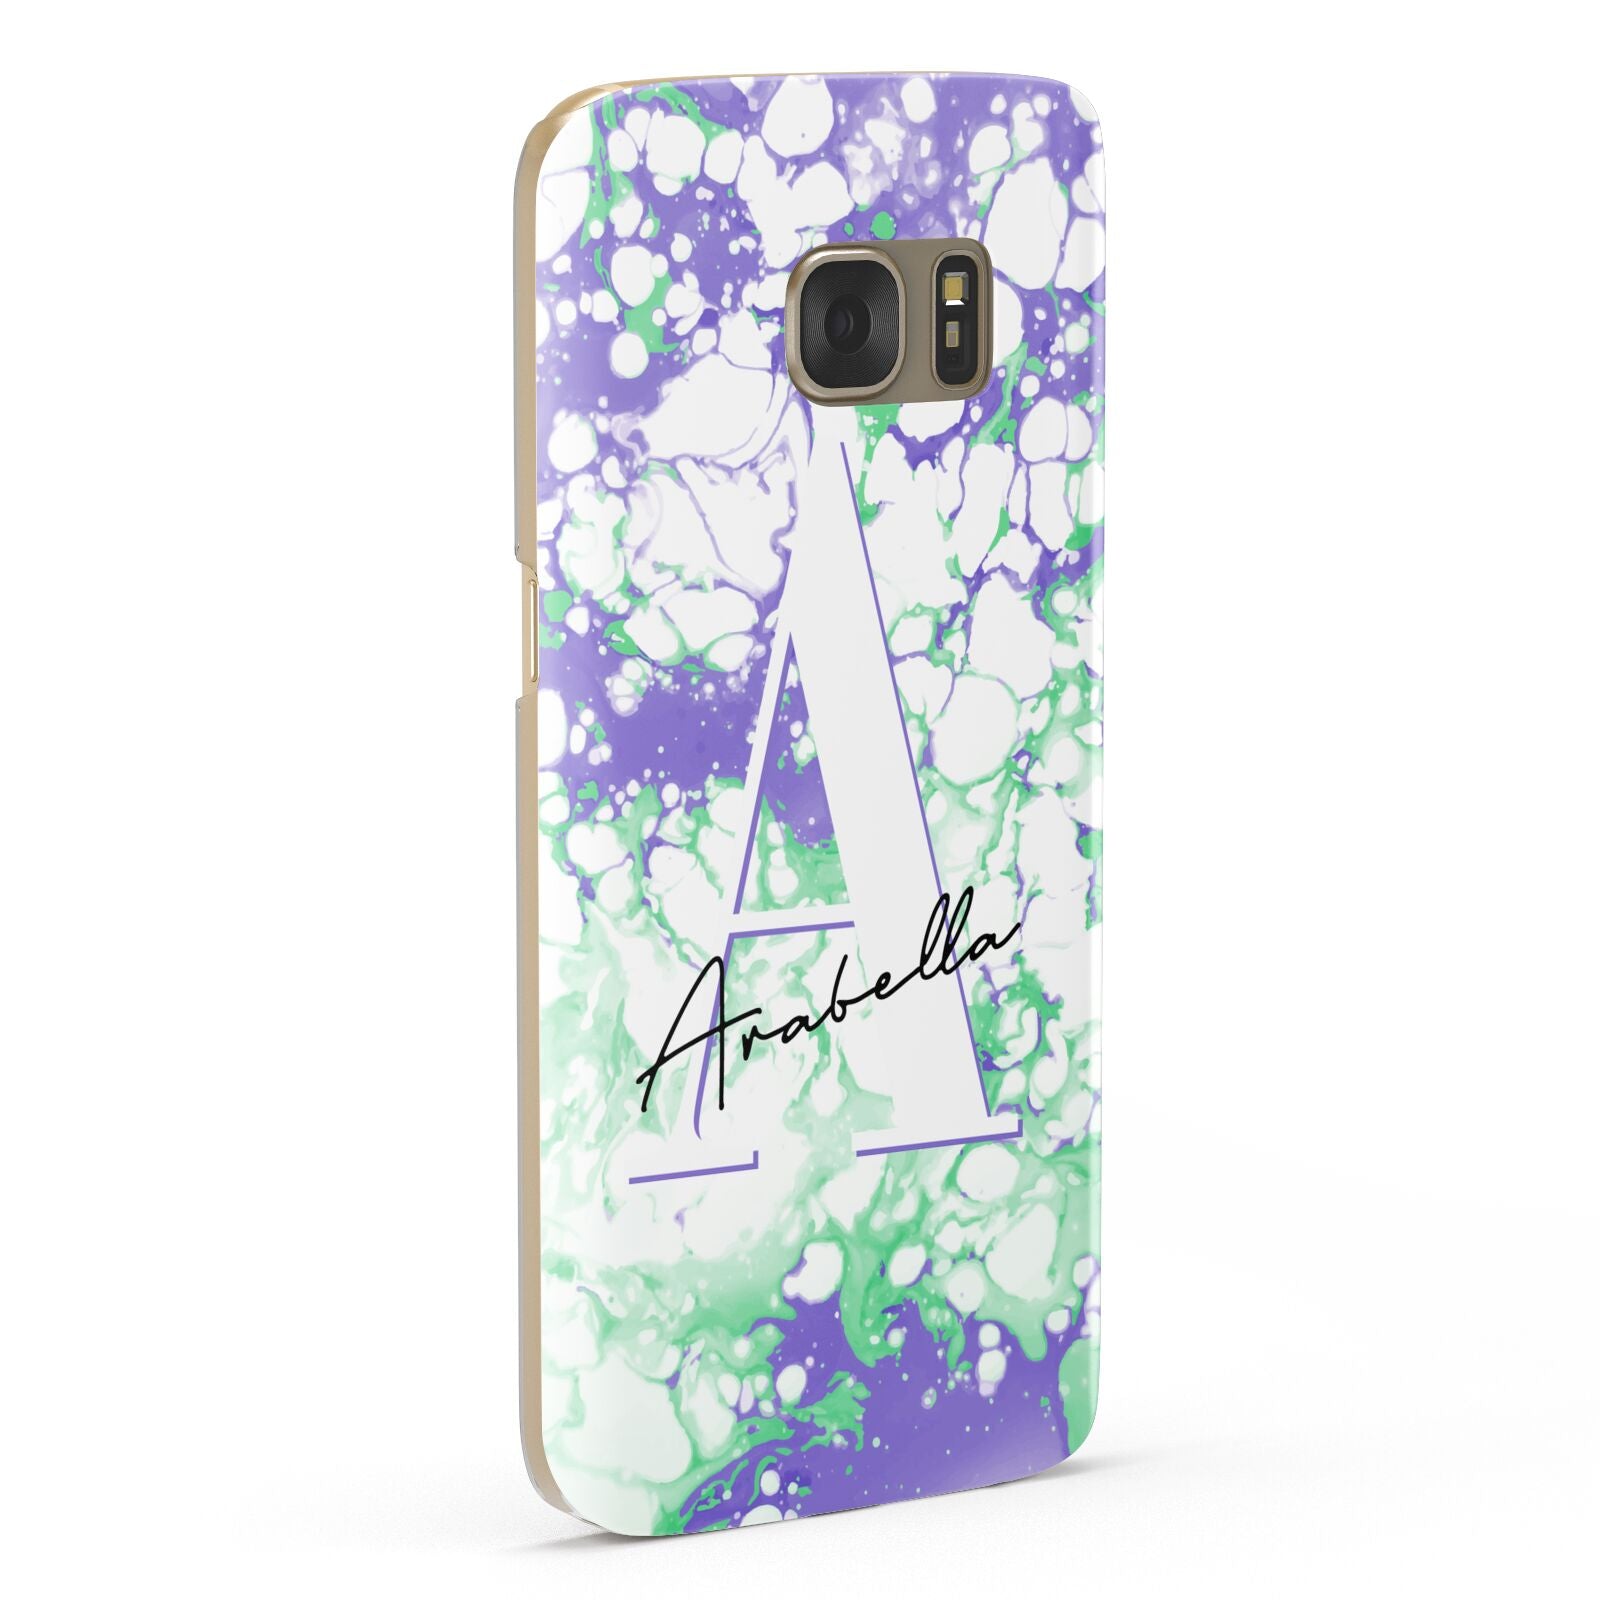 Personalised Liquid Marble Samsung Galaxy Case Fourty Five Degrees